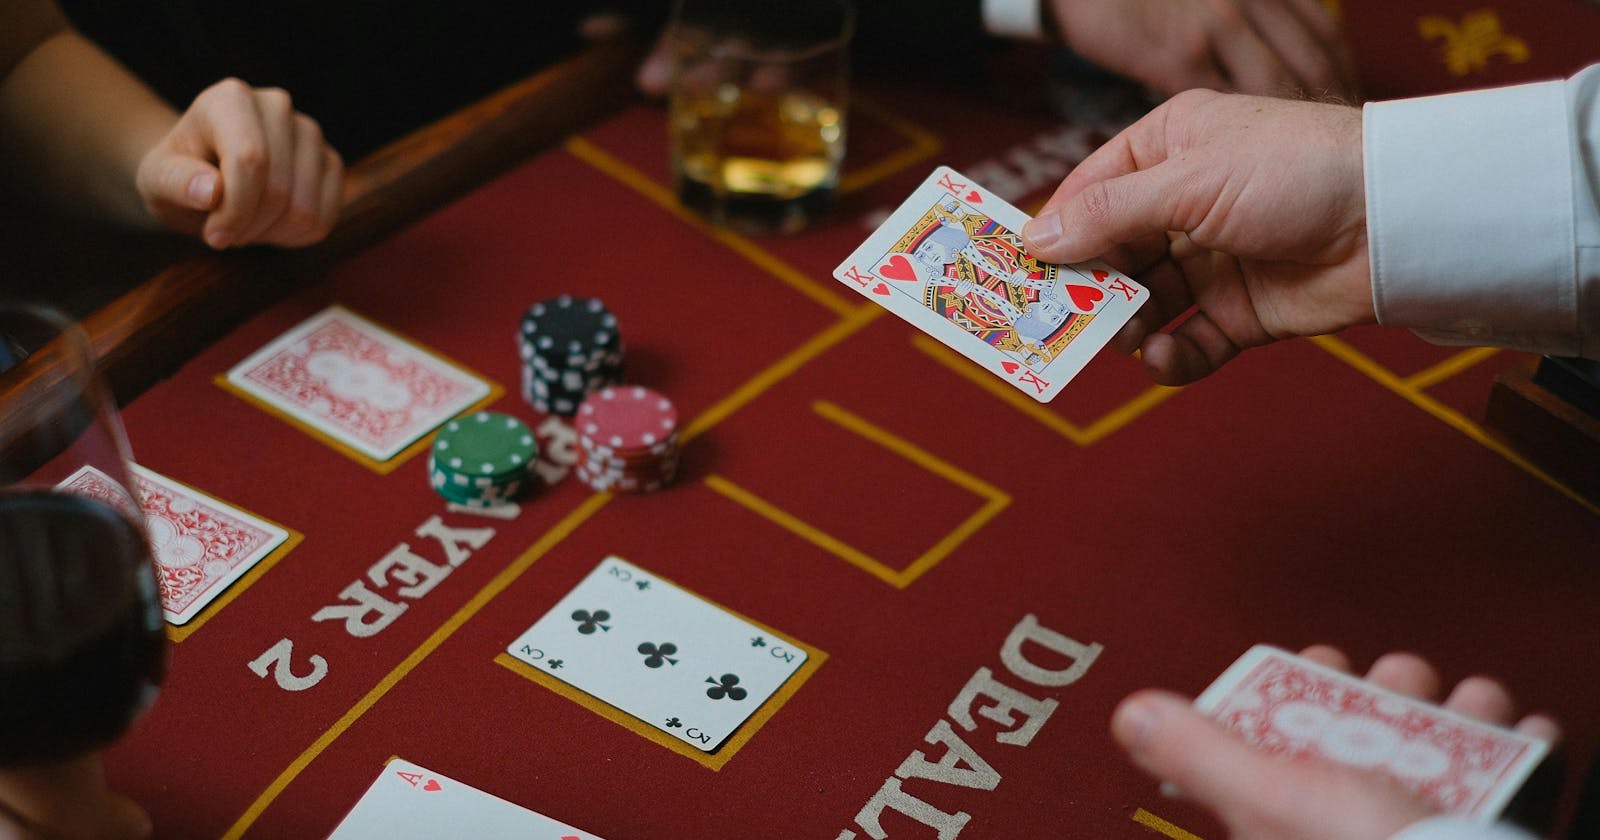 "Beyond the Surface: Unpacking the Motivations Behind Non-Exclusion Casinos"